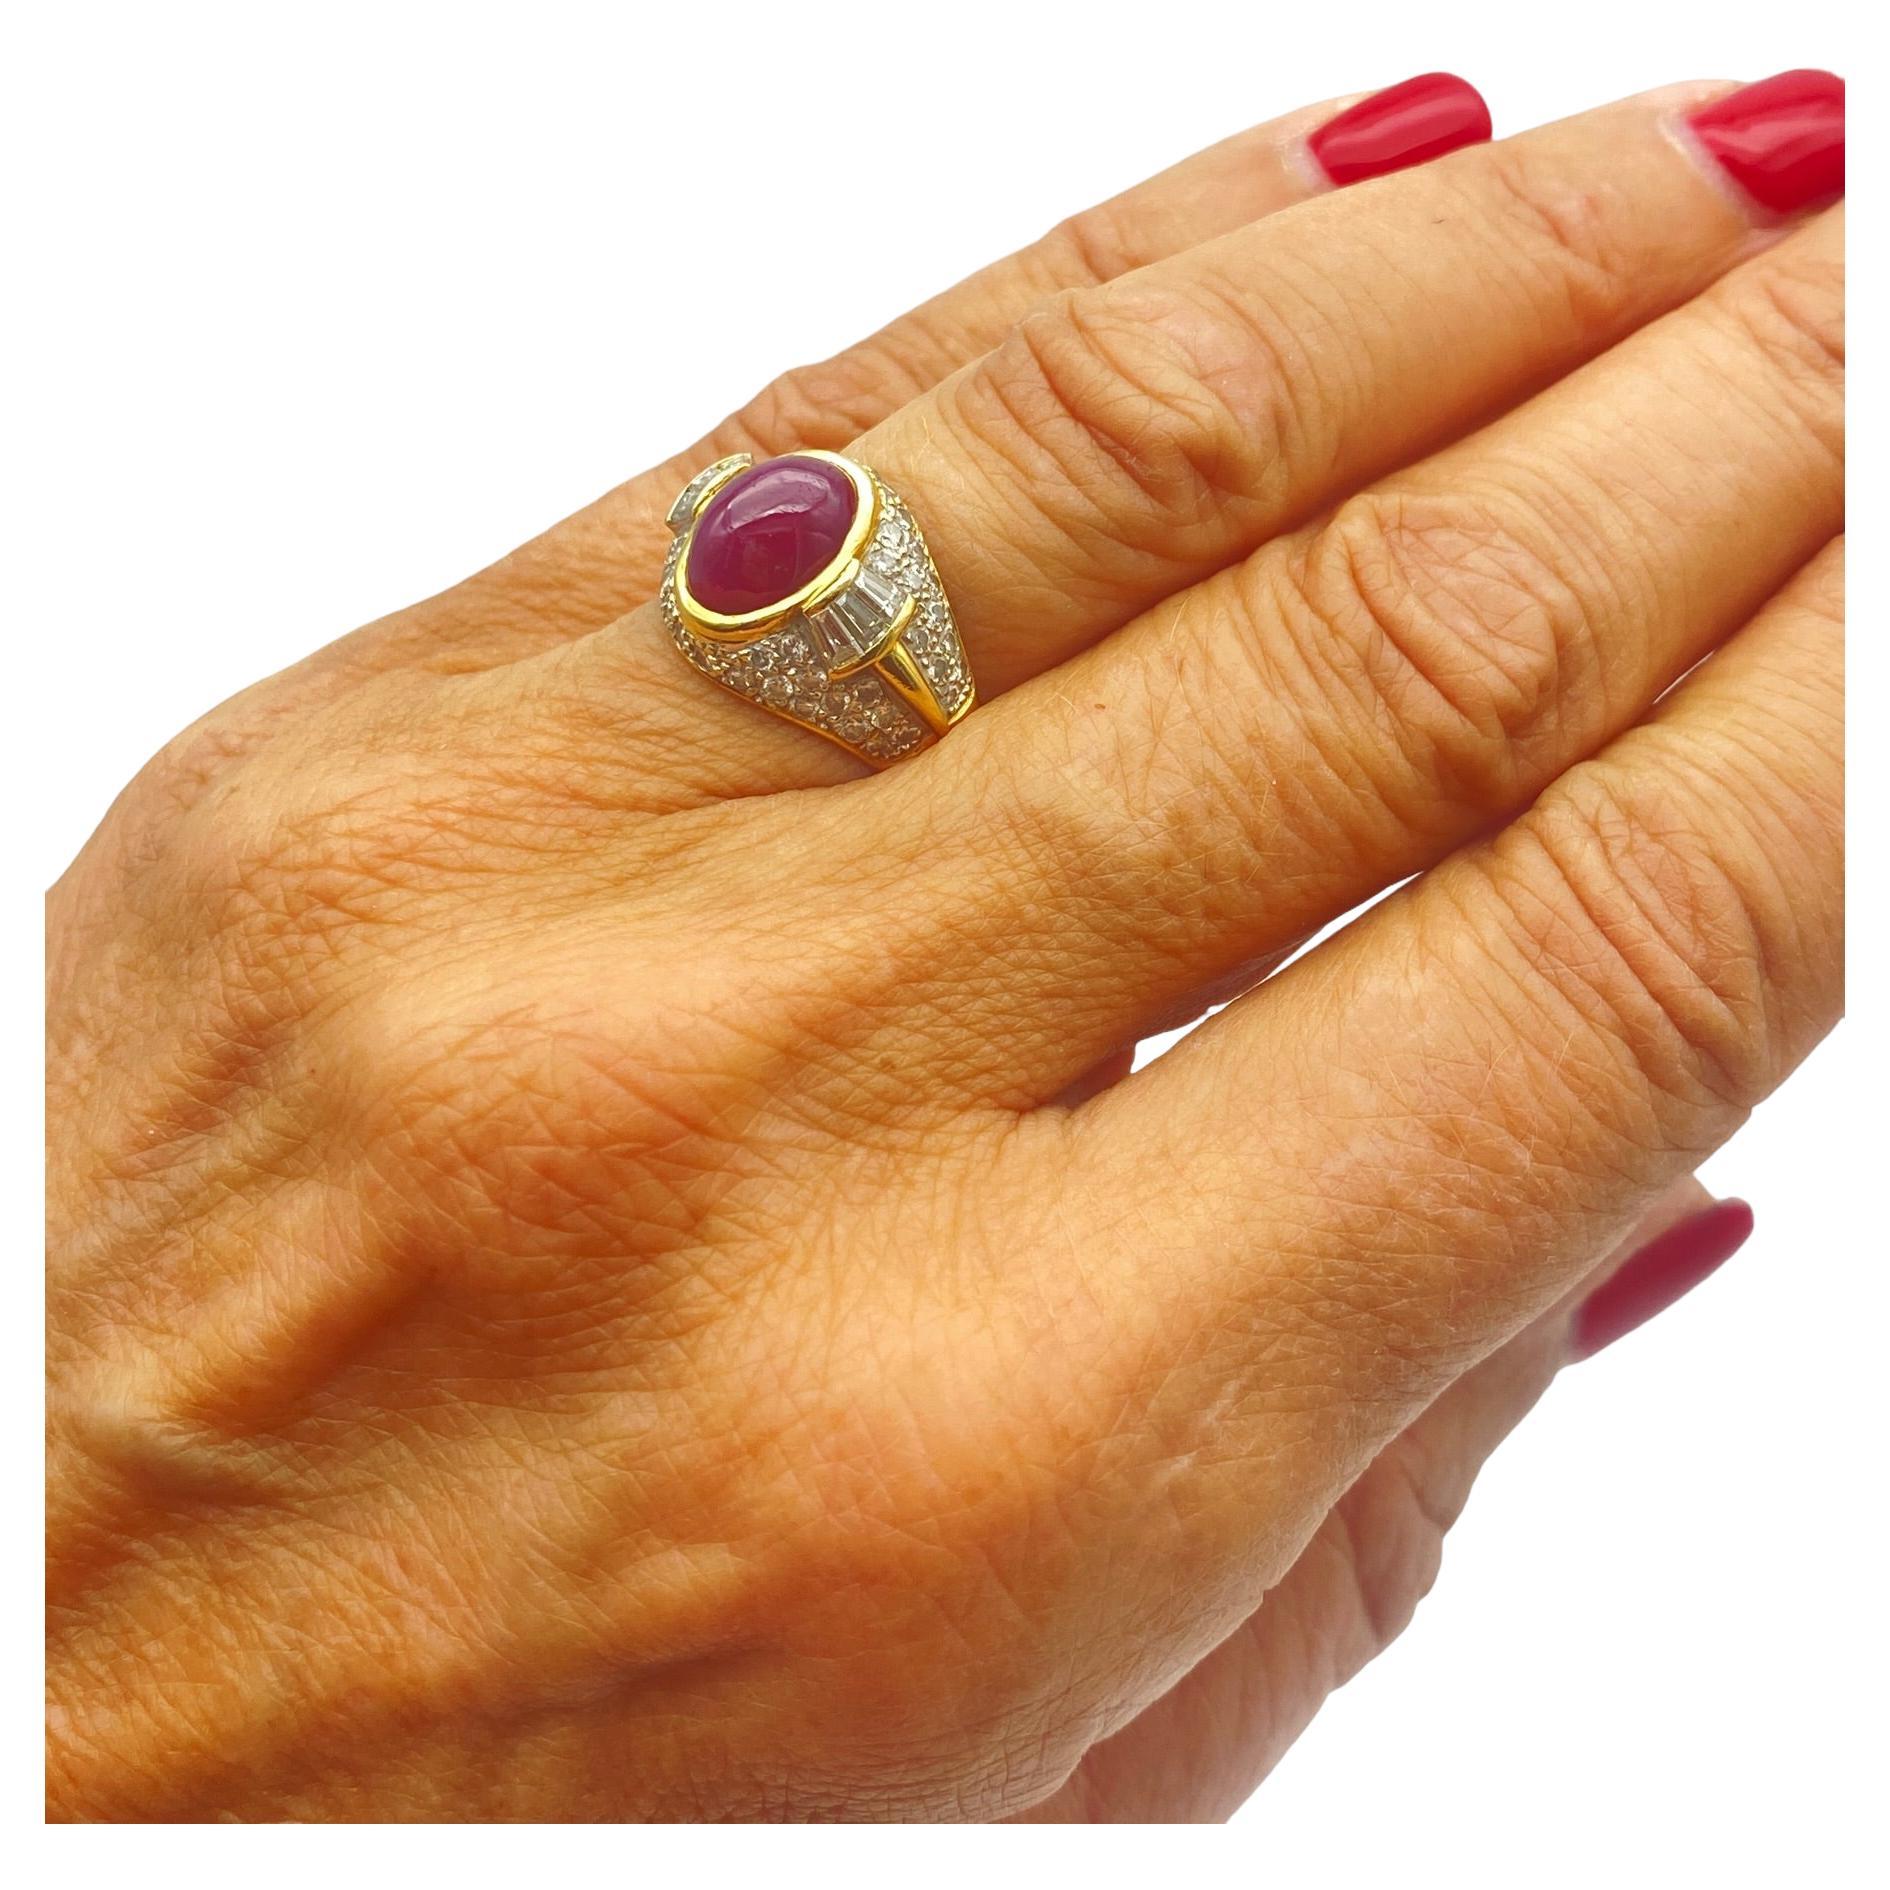 The exquisite dome ring features an oval red ruby shaped in a cabochon and surrounded by diamonds. The ring measures 14.30 mm wide at the top and graduates to a 4.80 mm shank. The ruby is counted as 10 x 8 x 5 mm in diameter and estimated as a 4.50